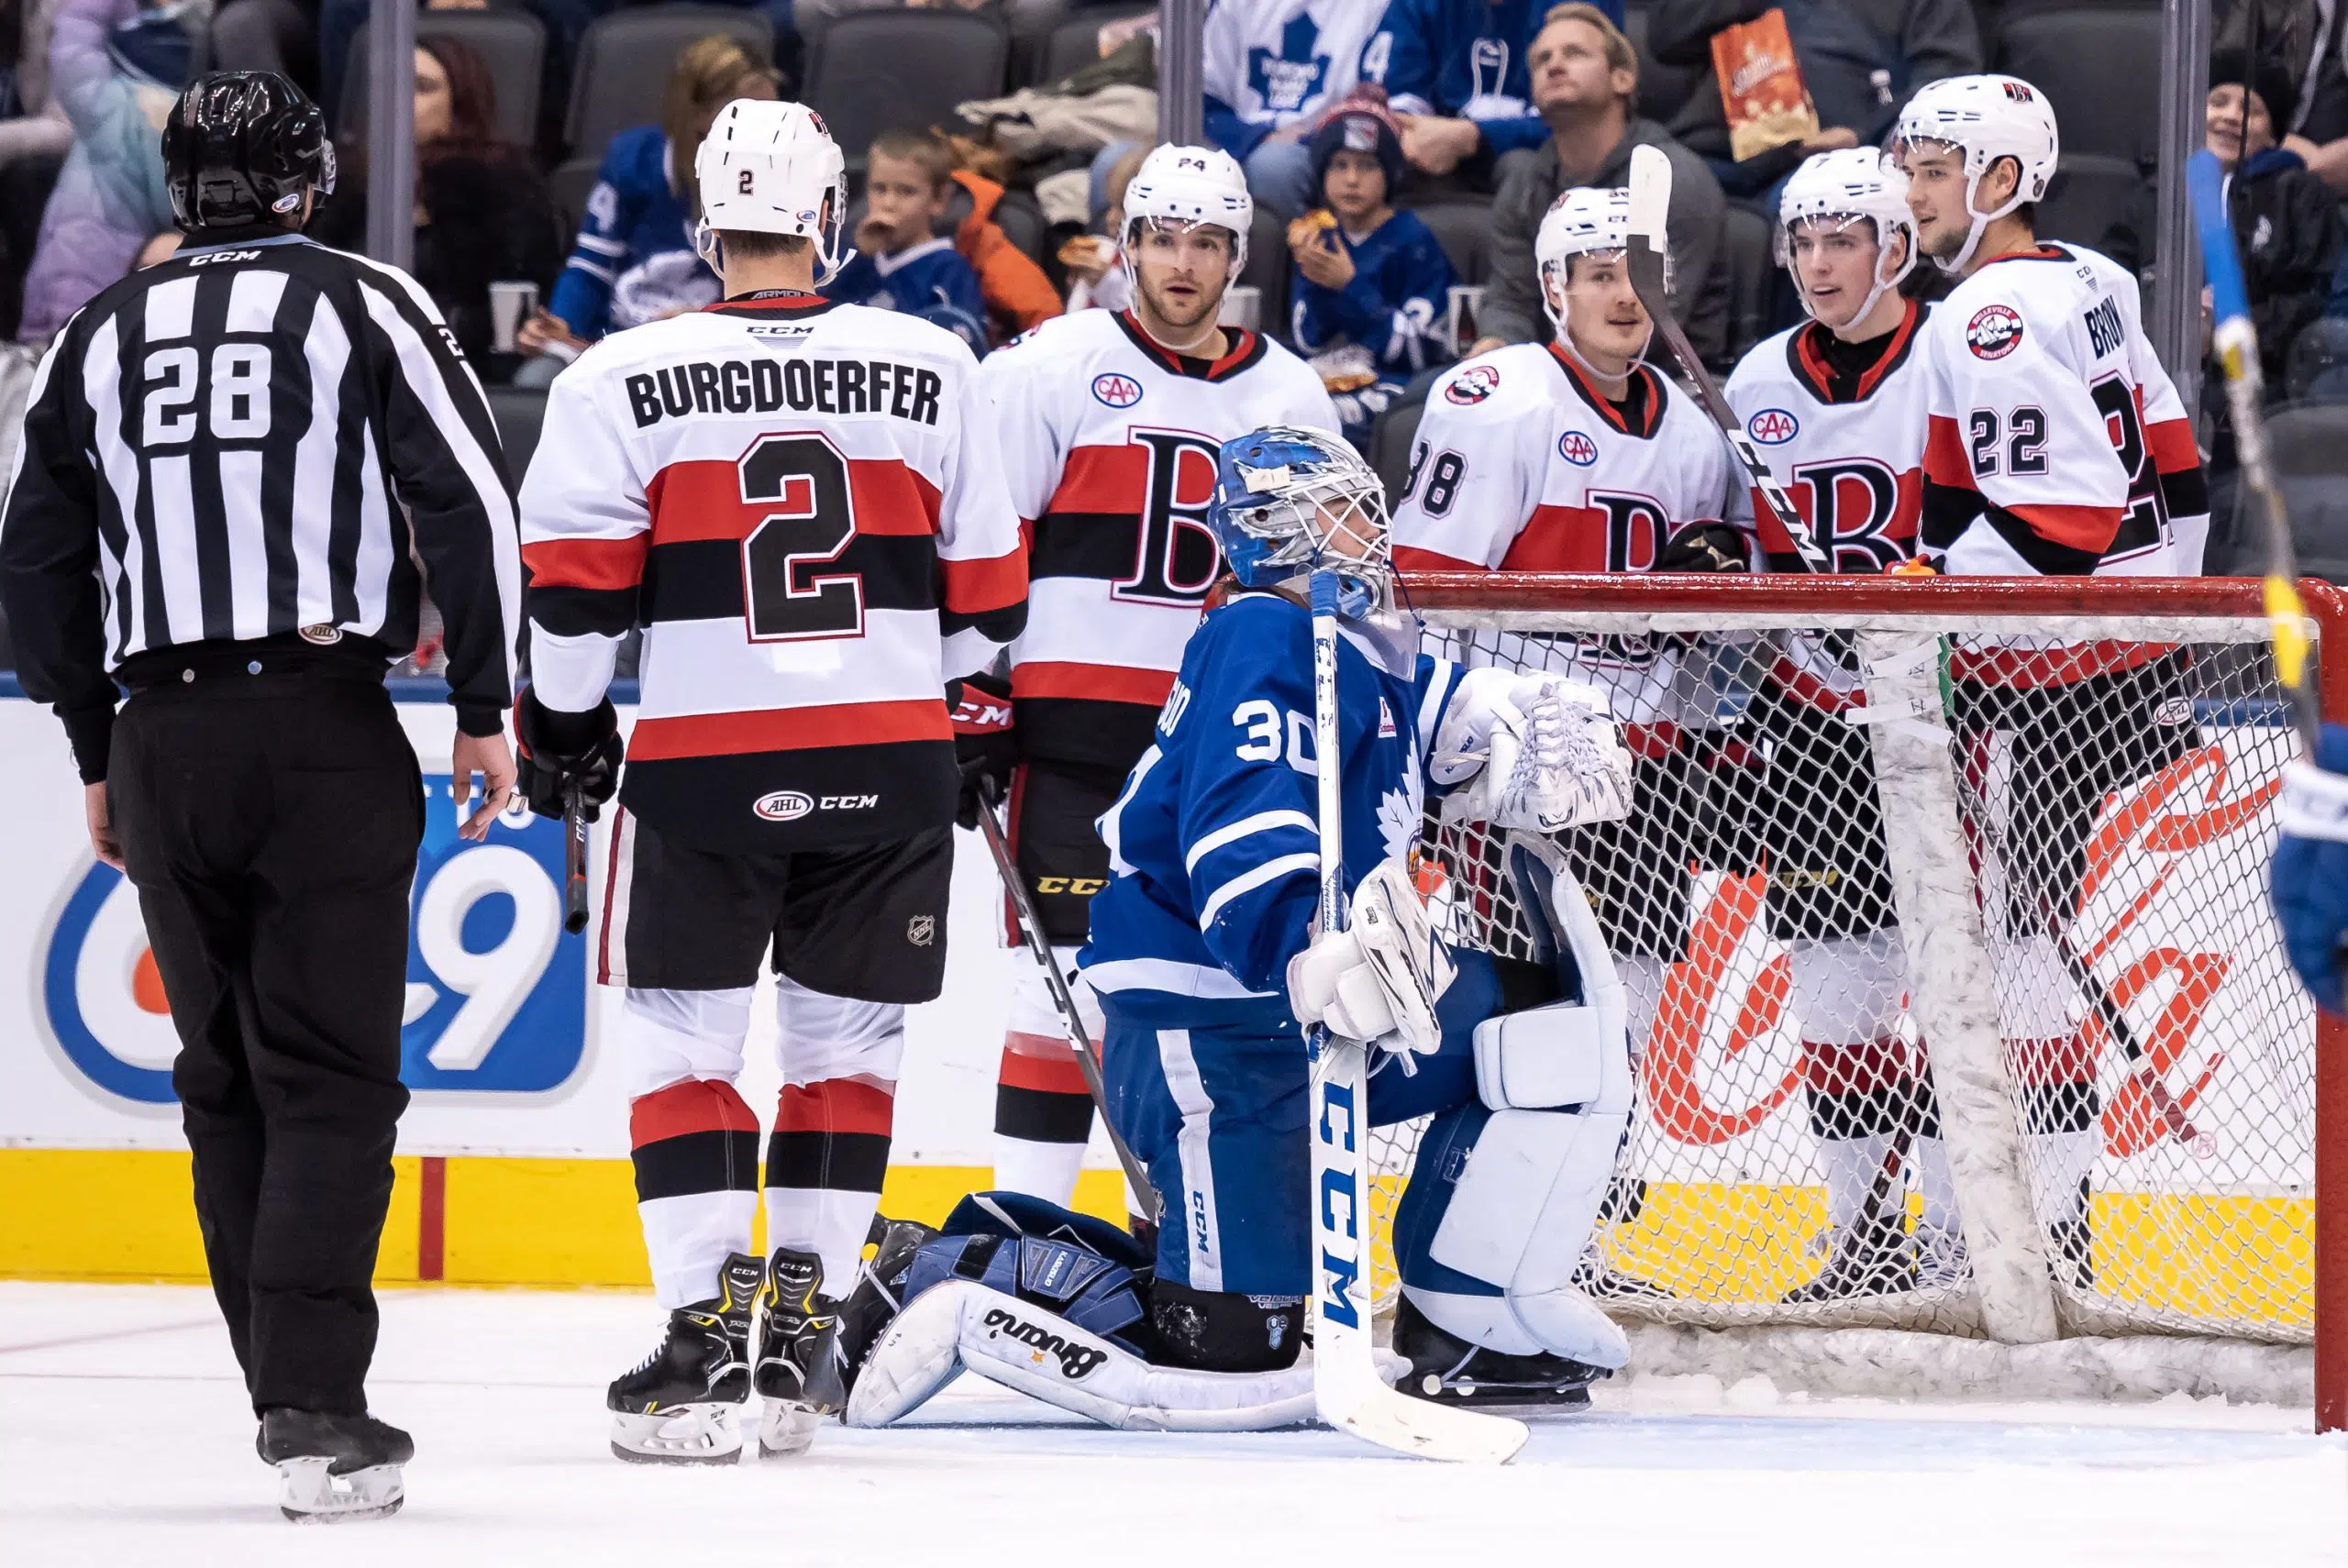 B-Sens best Marlies in Boxing Day Classic